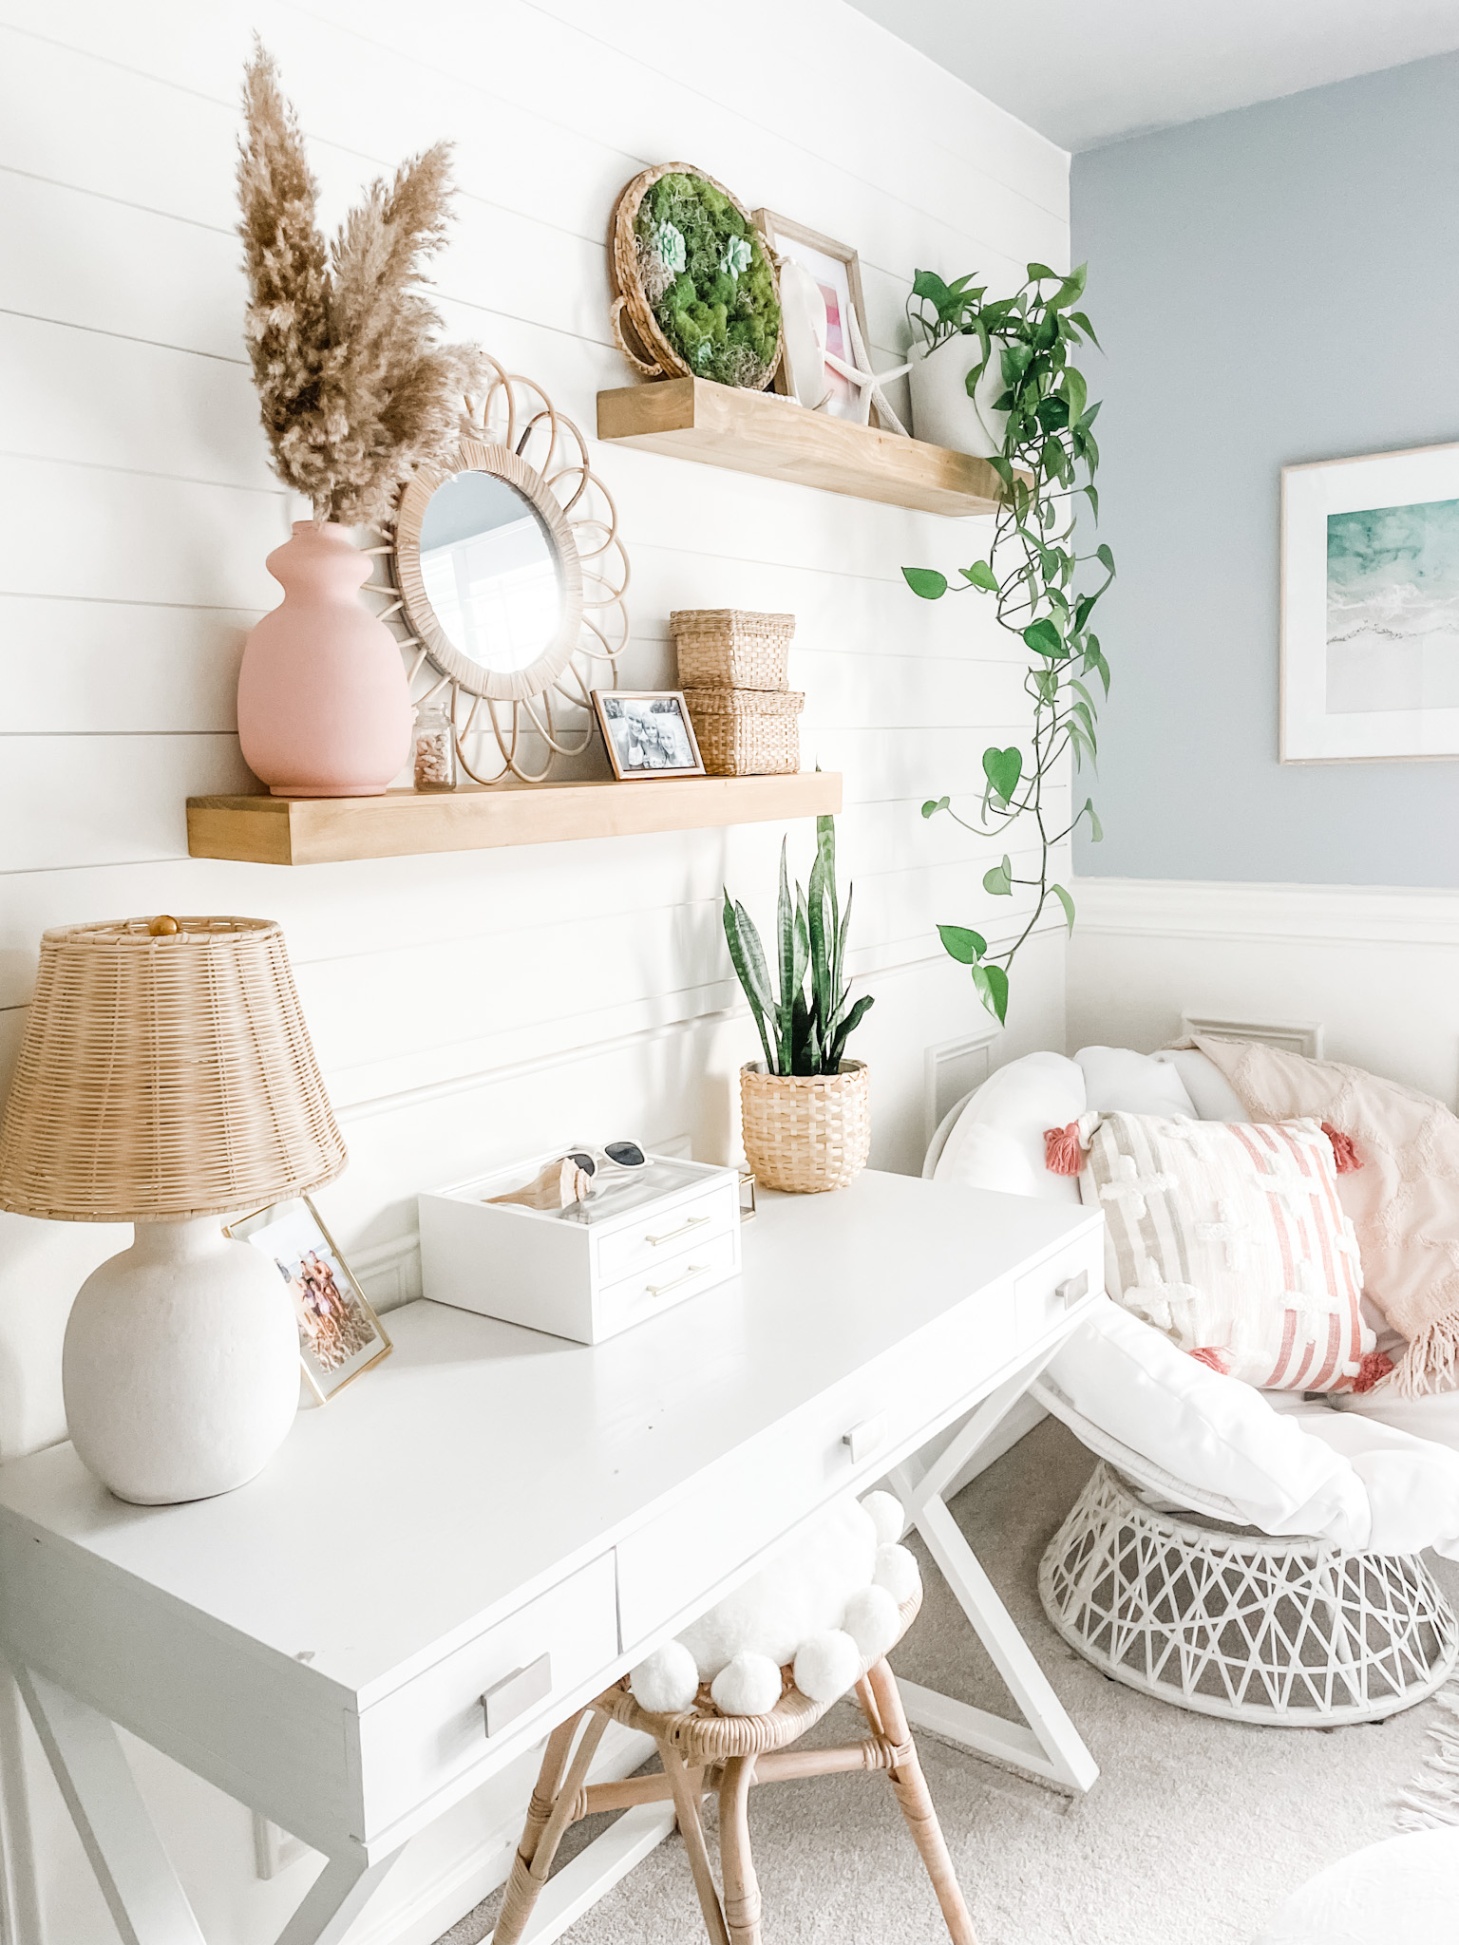 beachside bedroom decor Bulan 4 How To Decorate A Coastal Themed – Beachy Bedroom - Home with Heather